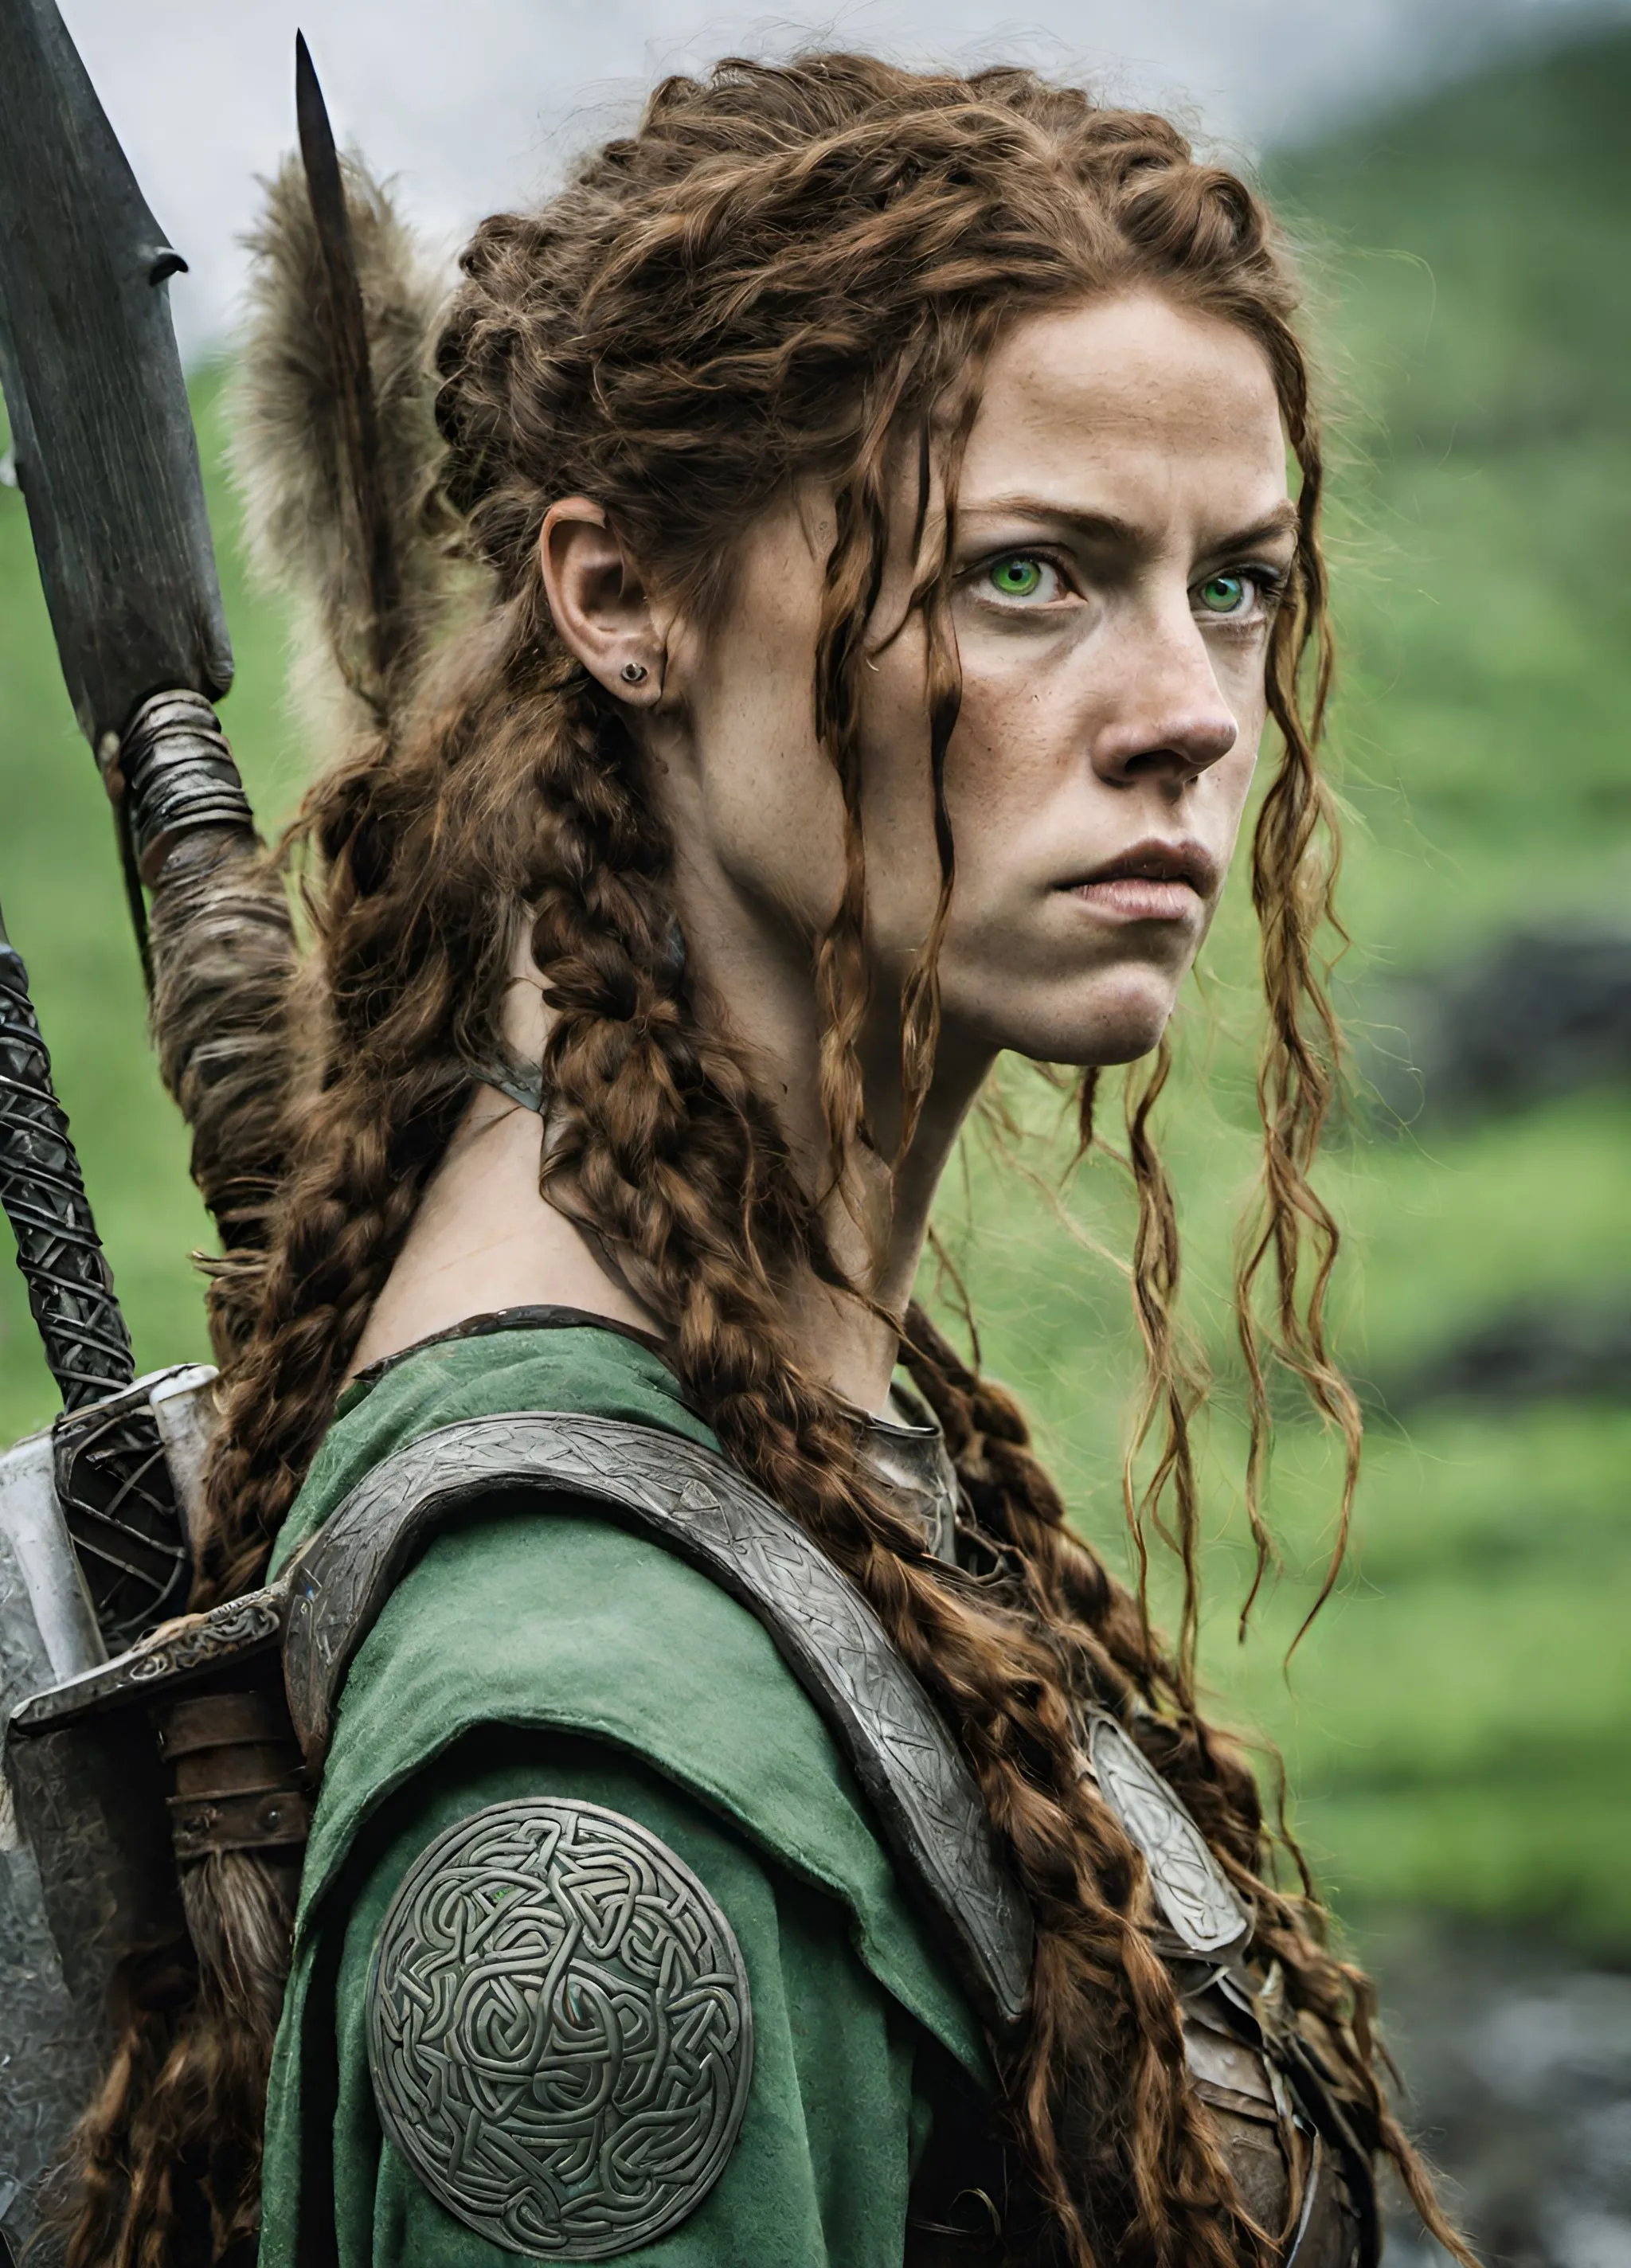 A woman with messy, braided red hair and green eyes, wearing a tunic decorated with celtic knots, looking to the right with a grim expression on her face.